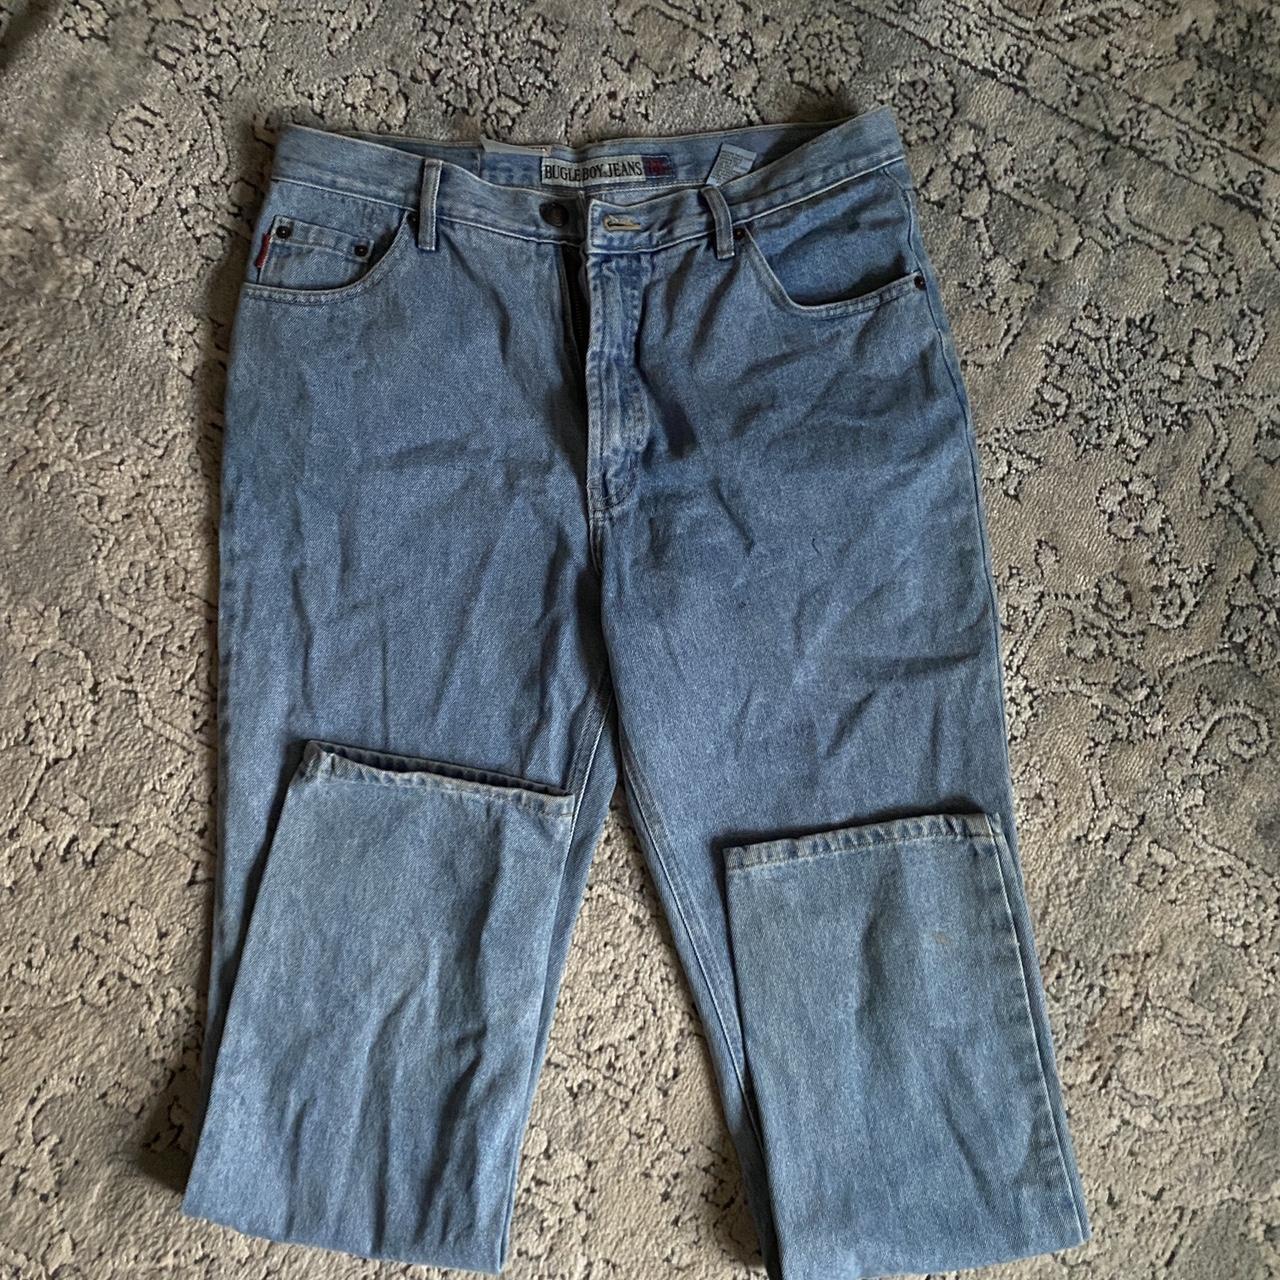 Vintage Bugle Boy Jeans brand new with tags and... - Depop